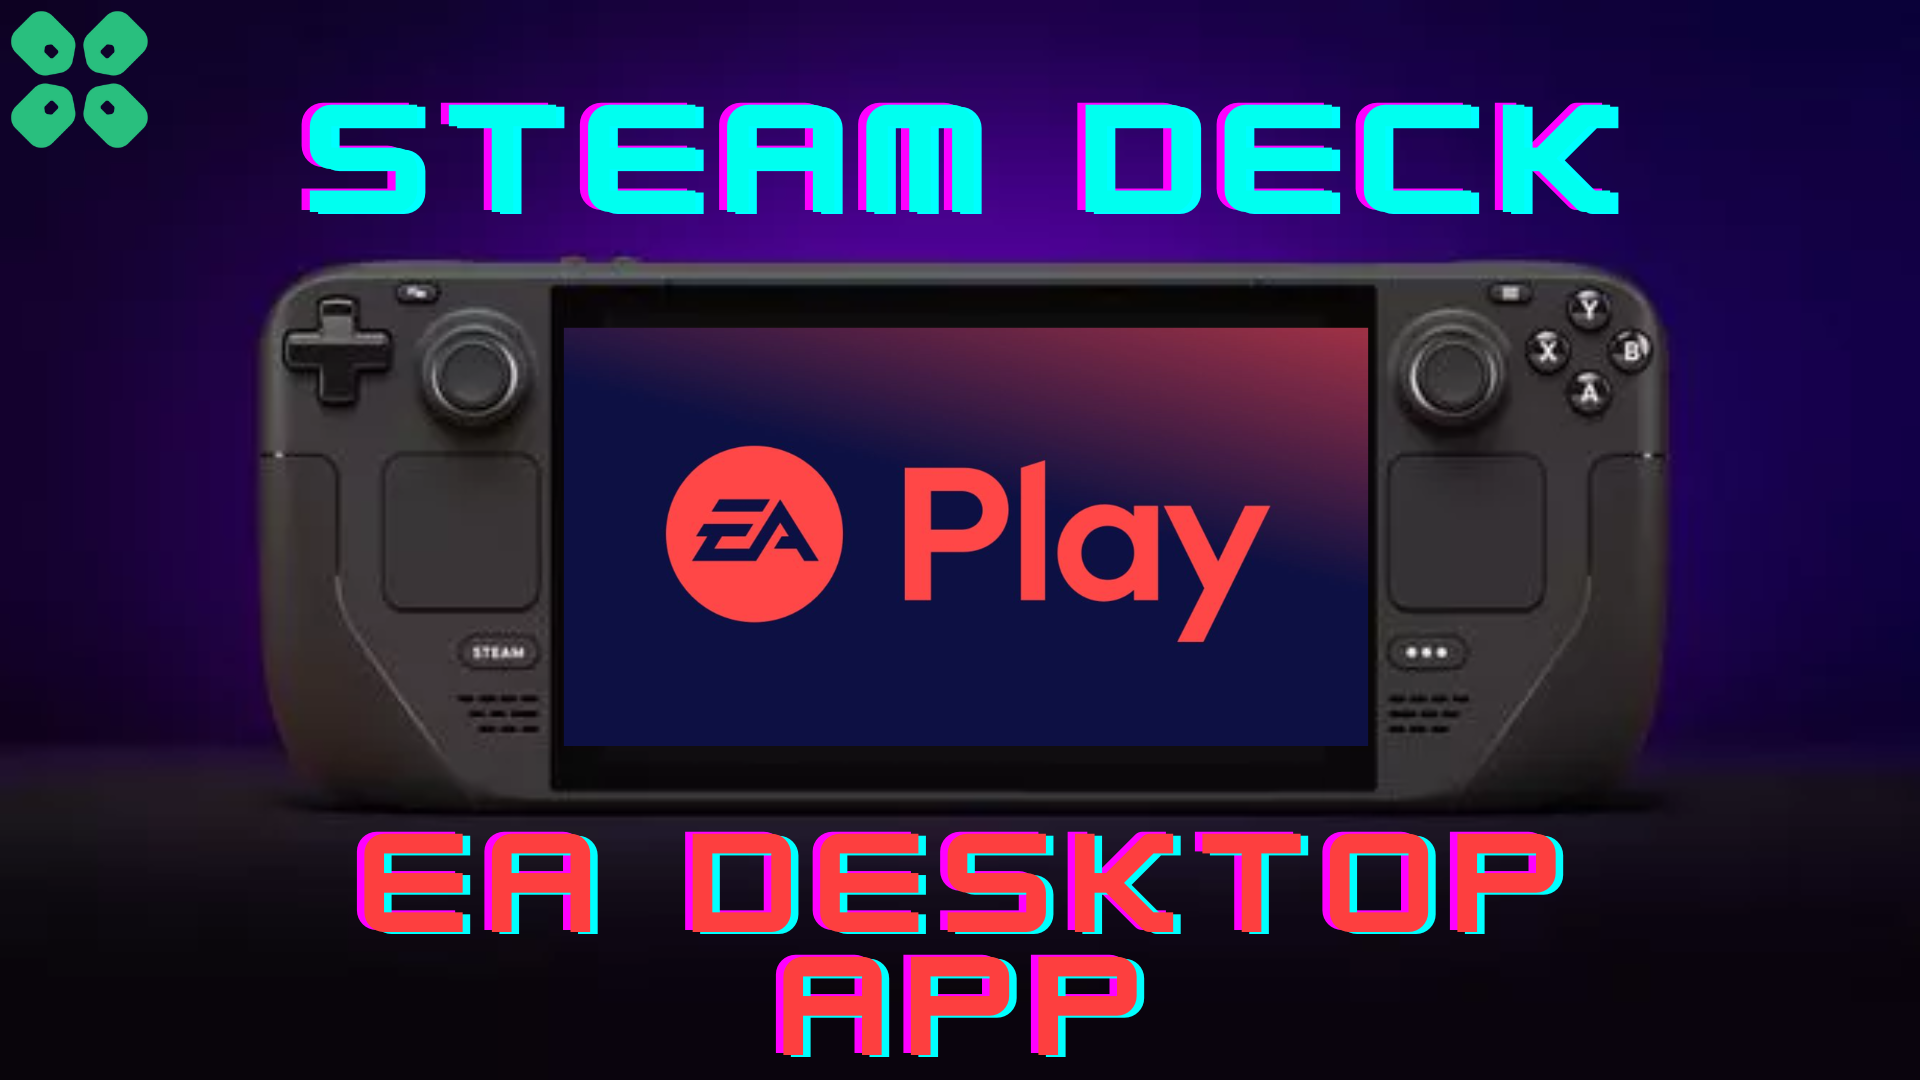 How to Install the EA Desktop App on the Steam Deck - Pi My Life Up